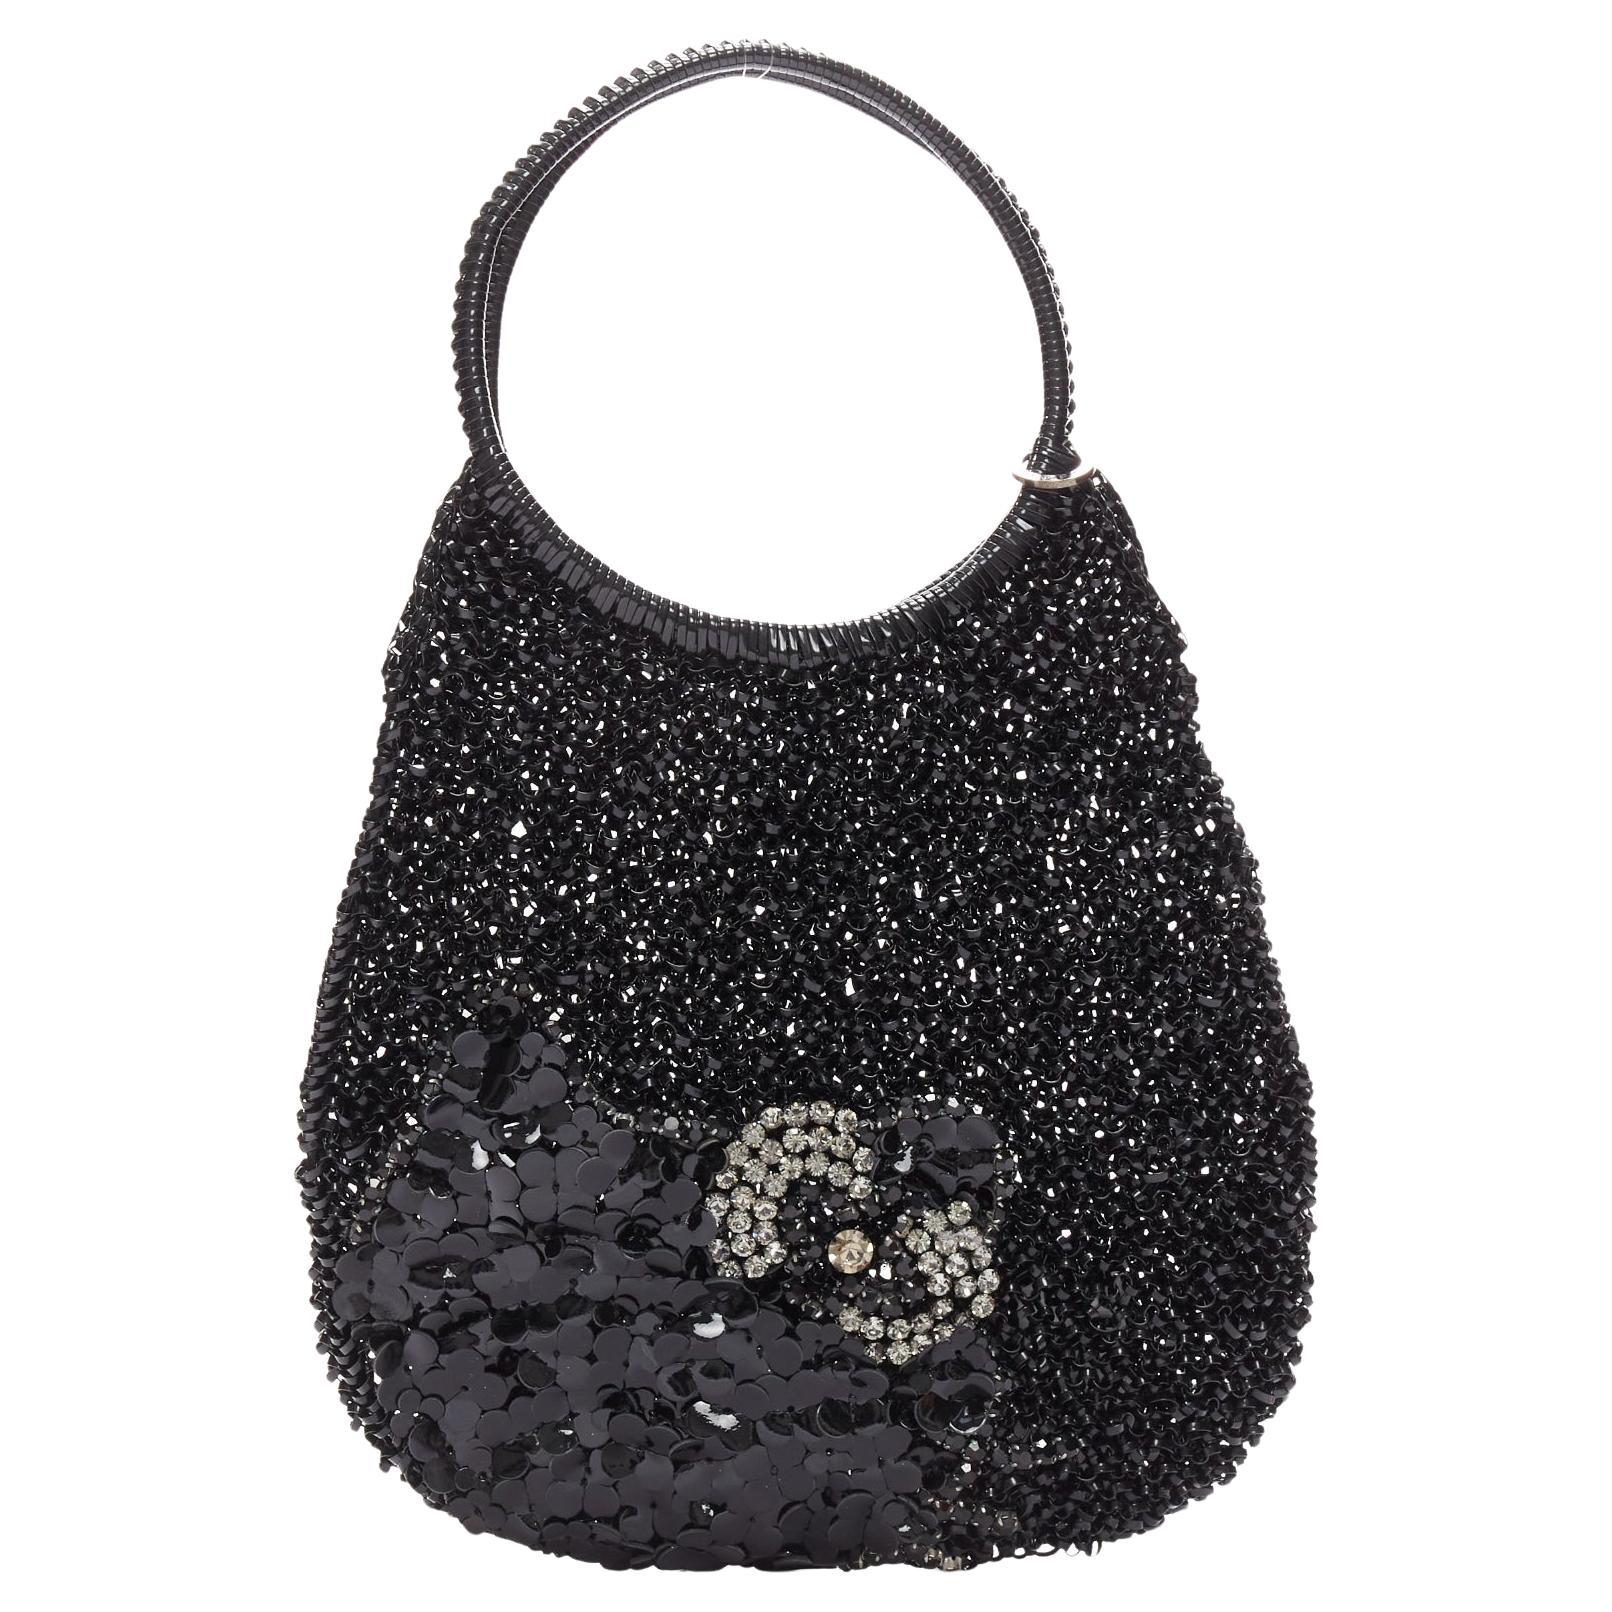 ANTEPRIMA HELLO KITTY Wire Bag black crystal leather sequin teardrop tote